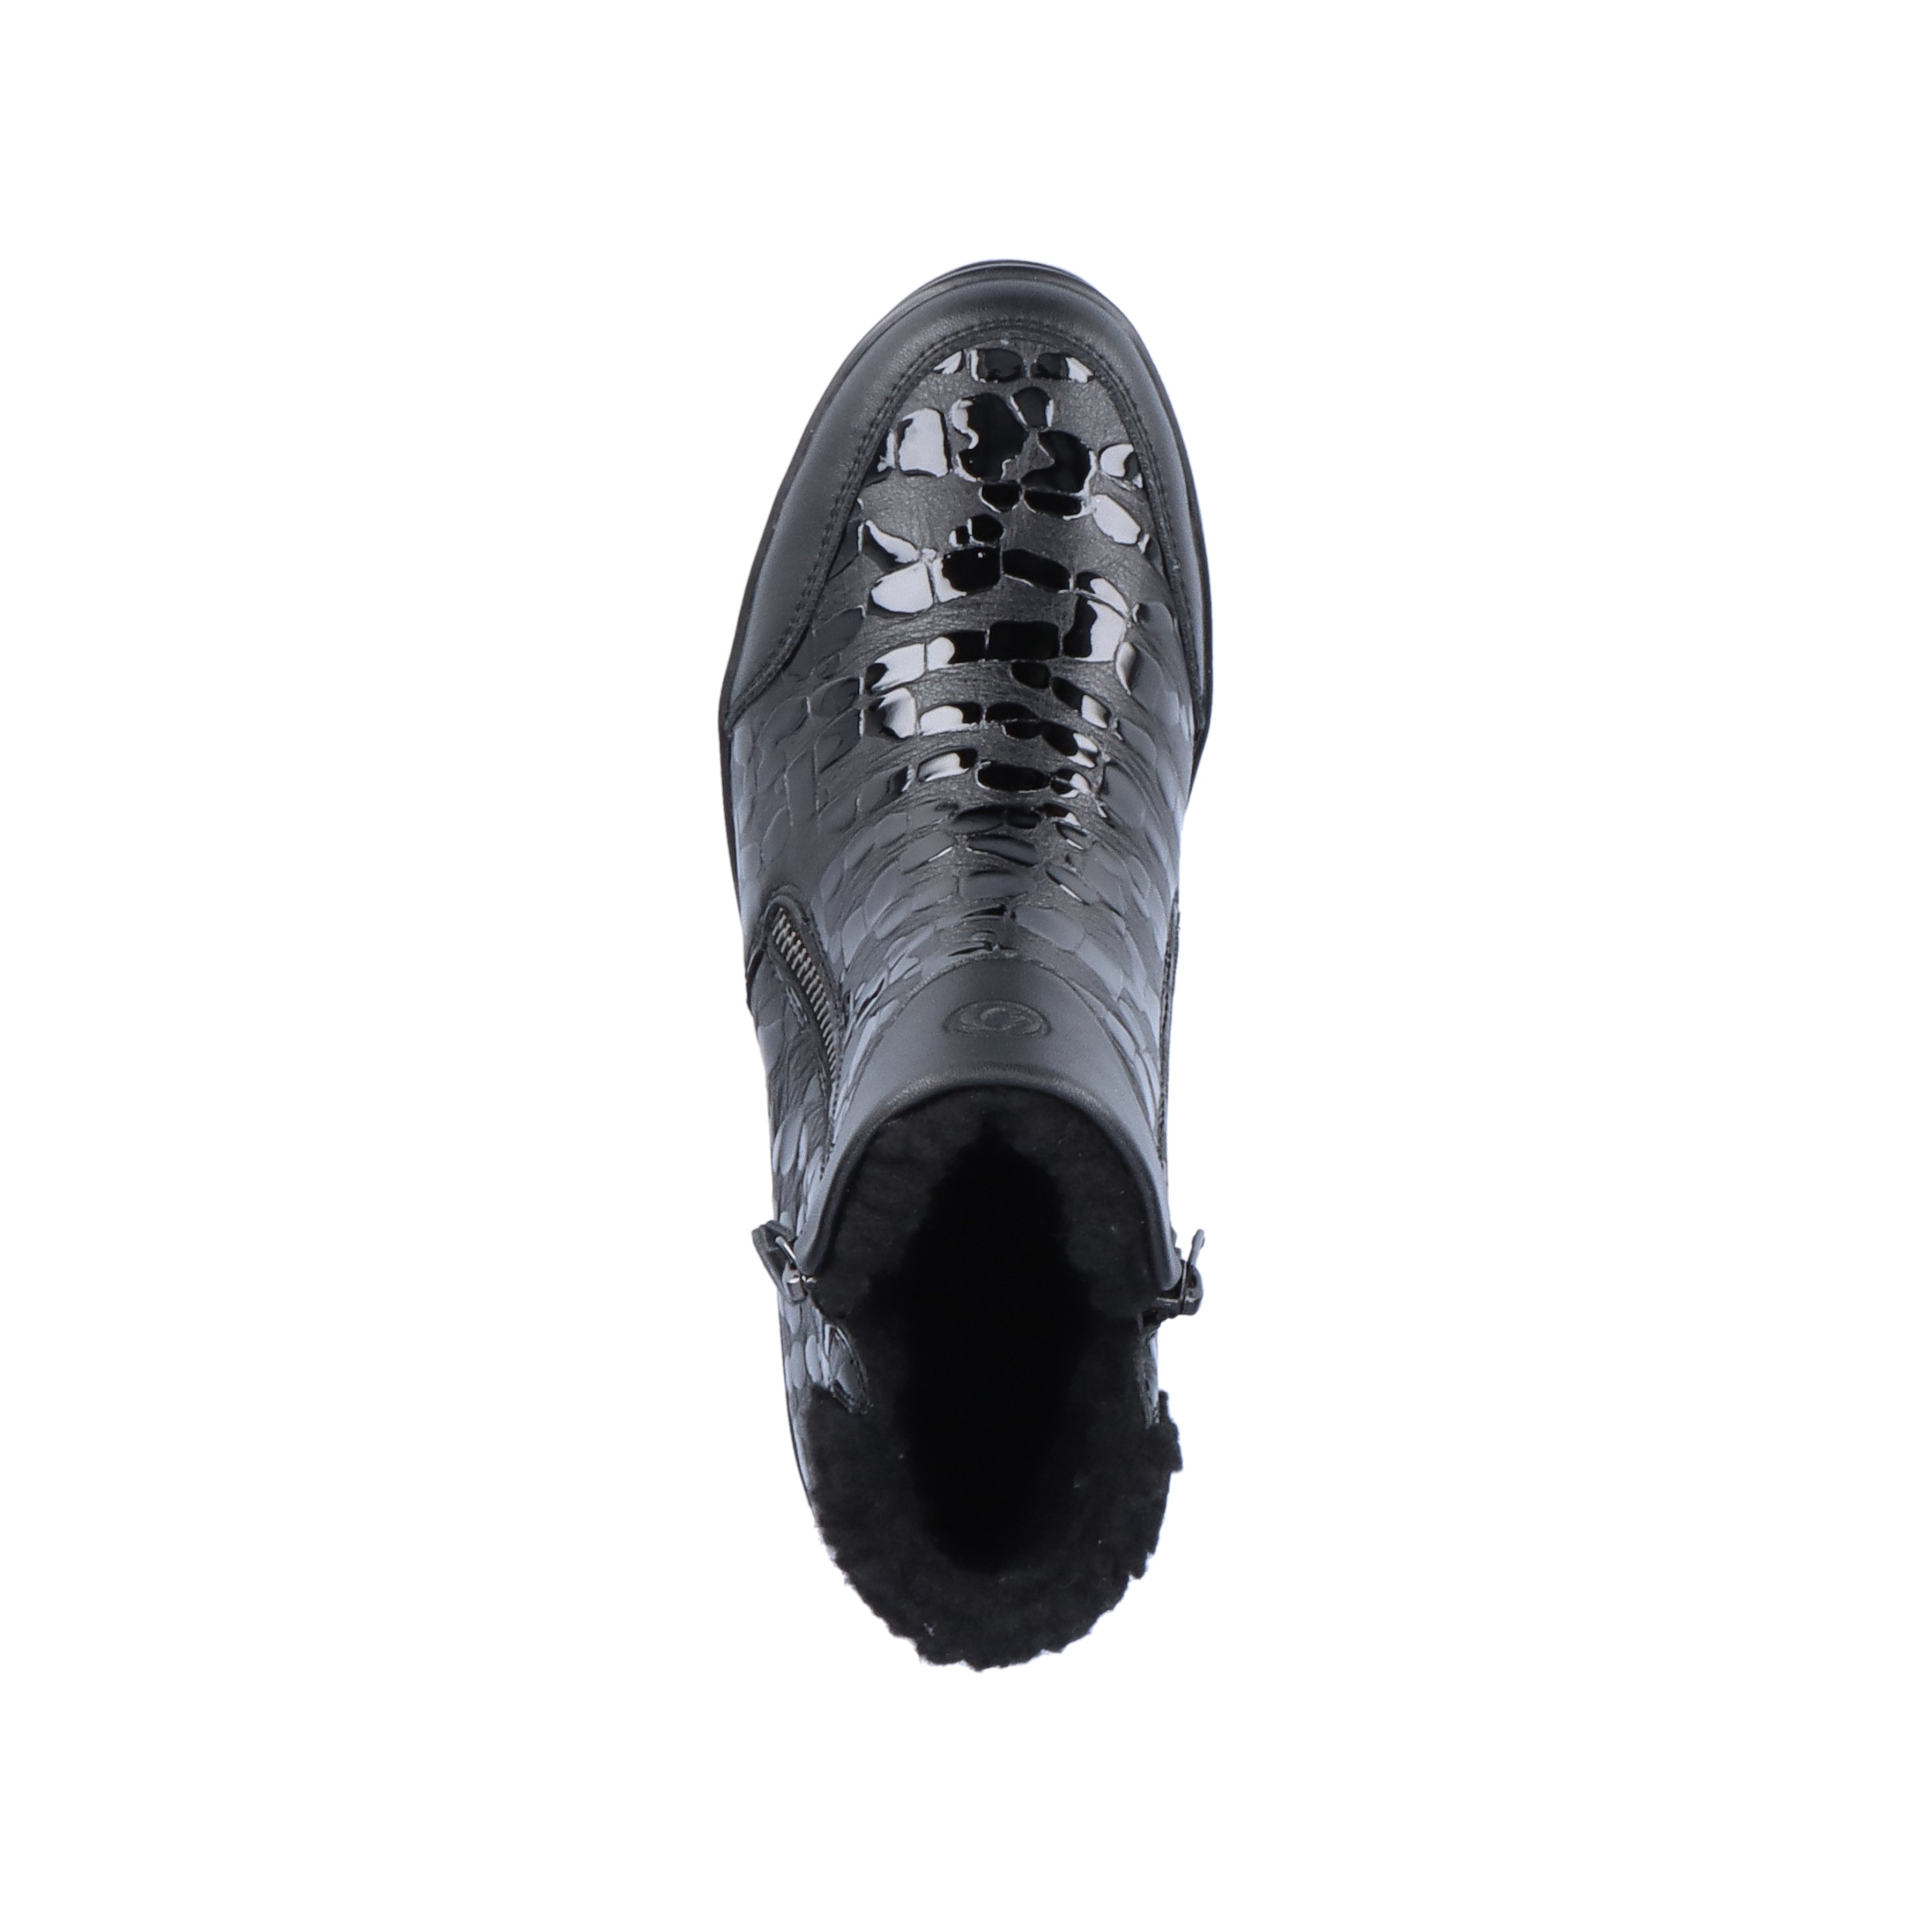 Glossy black remonte women´s ankle boots R0775-03 with flexible profile sole. Shoe from the top